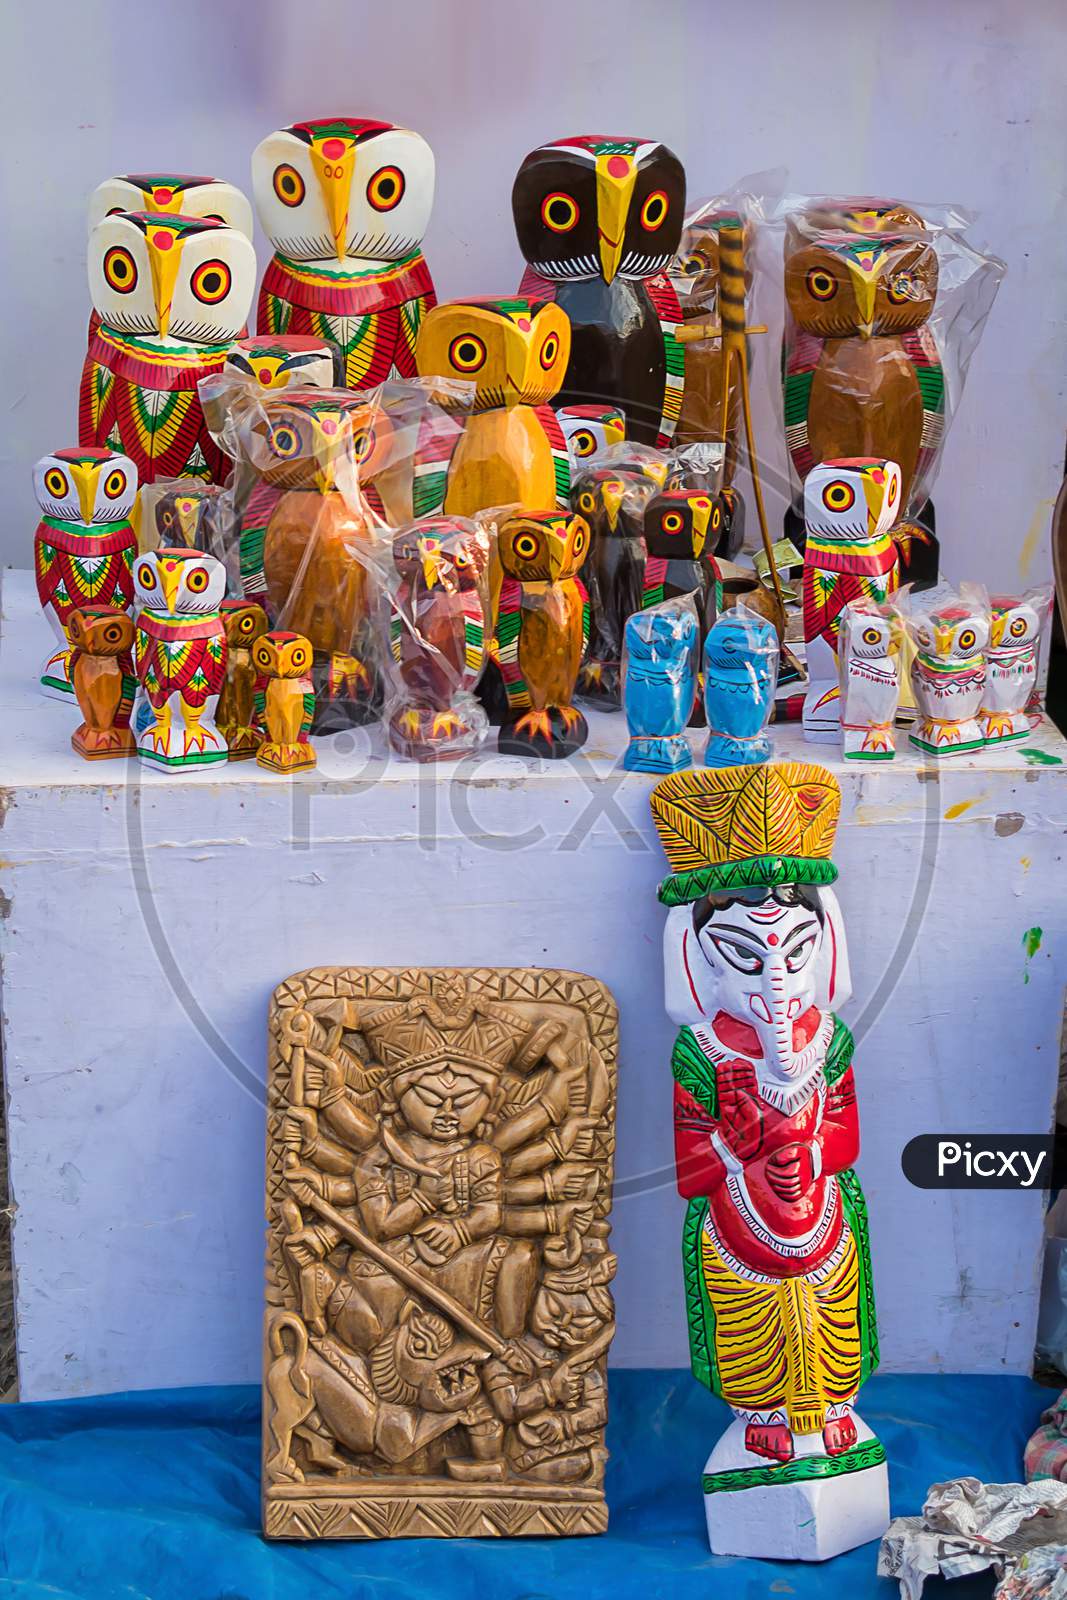 Indian Traditional Handmade Wooden Toys Is Displayed In A Street Shop For Sale. Indian Handicraft And Art